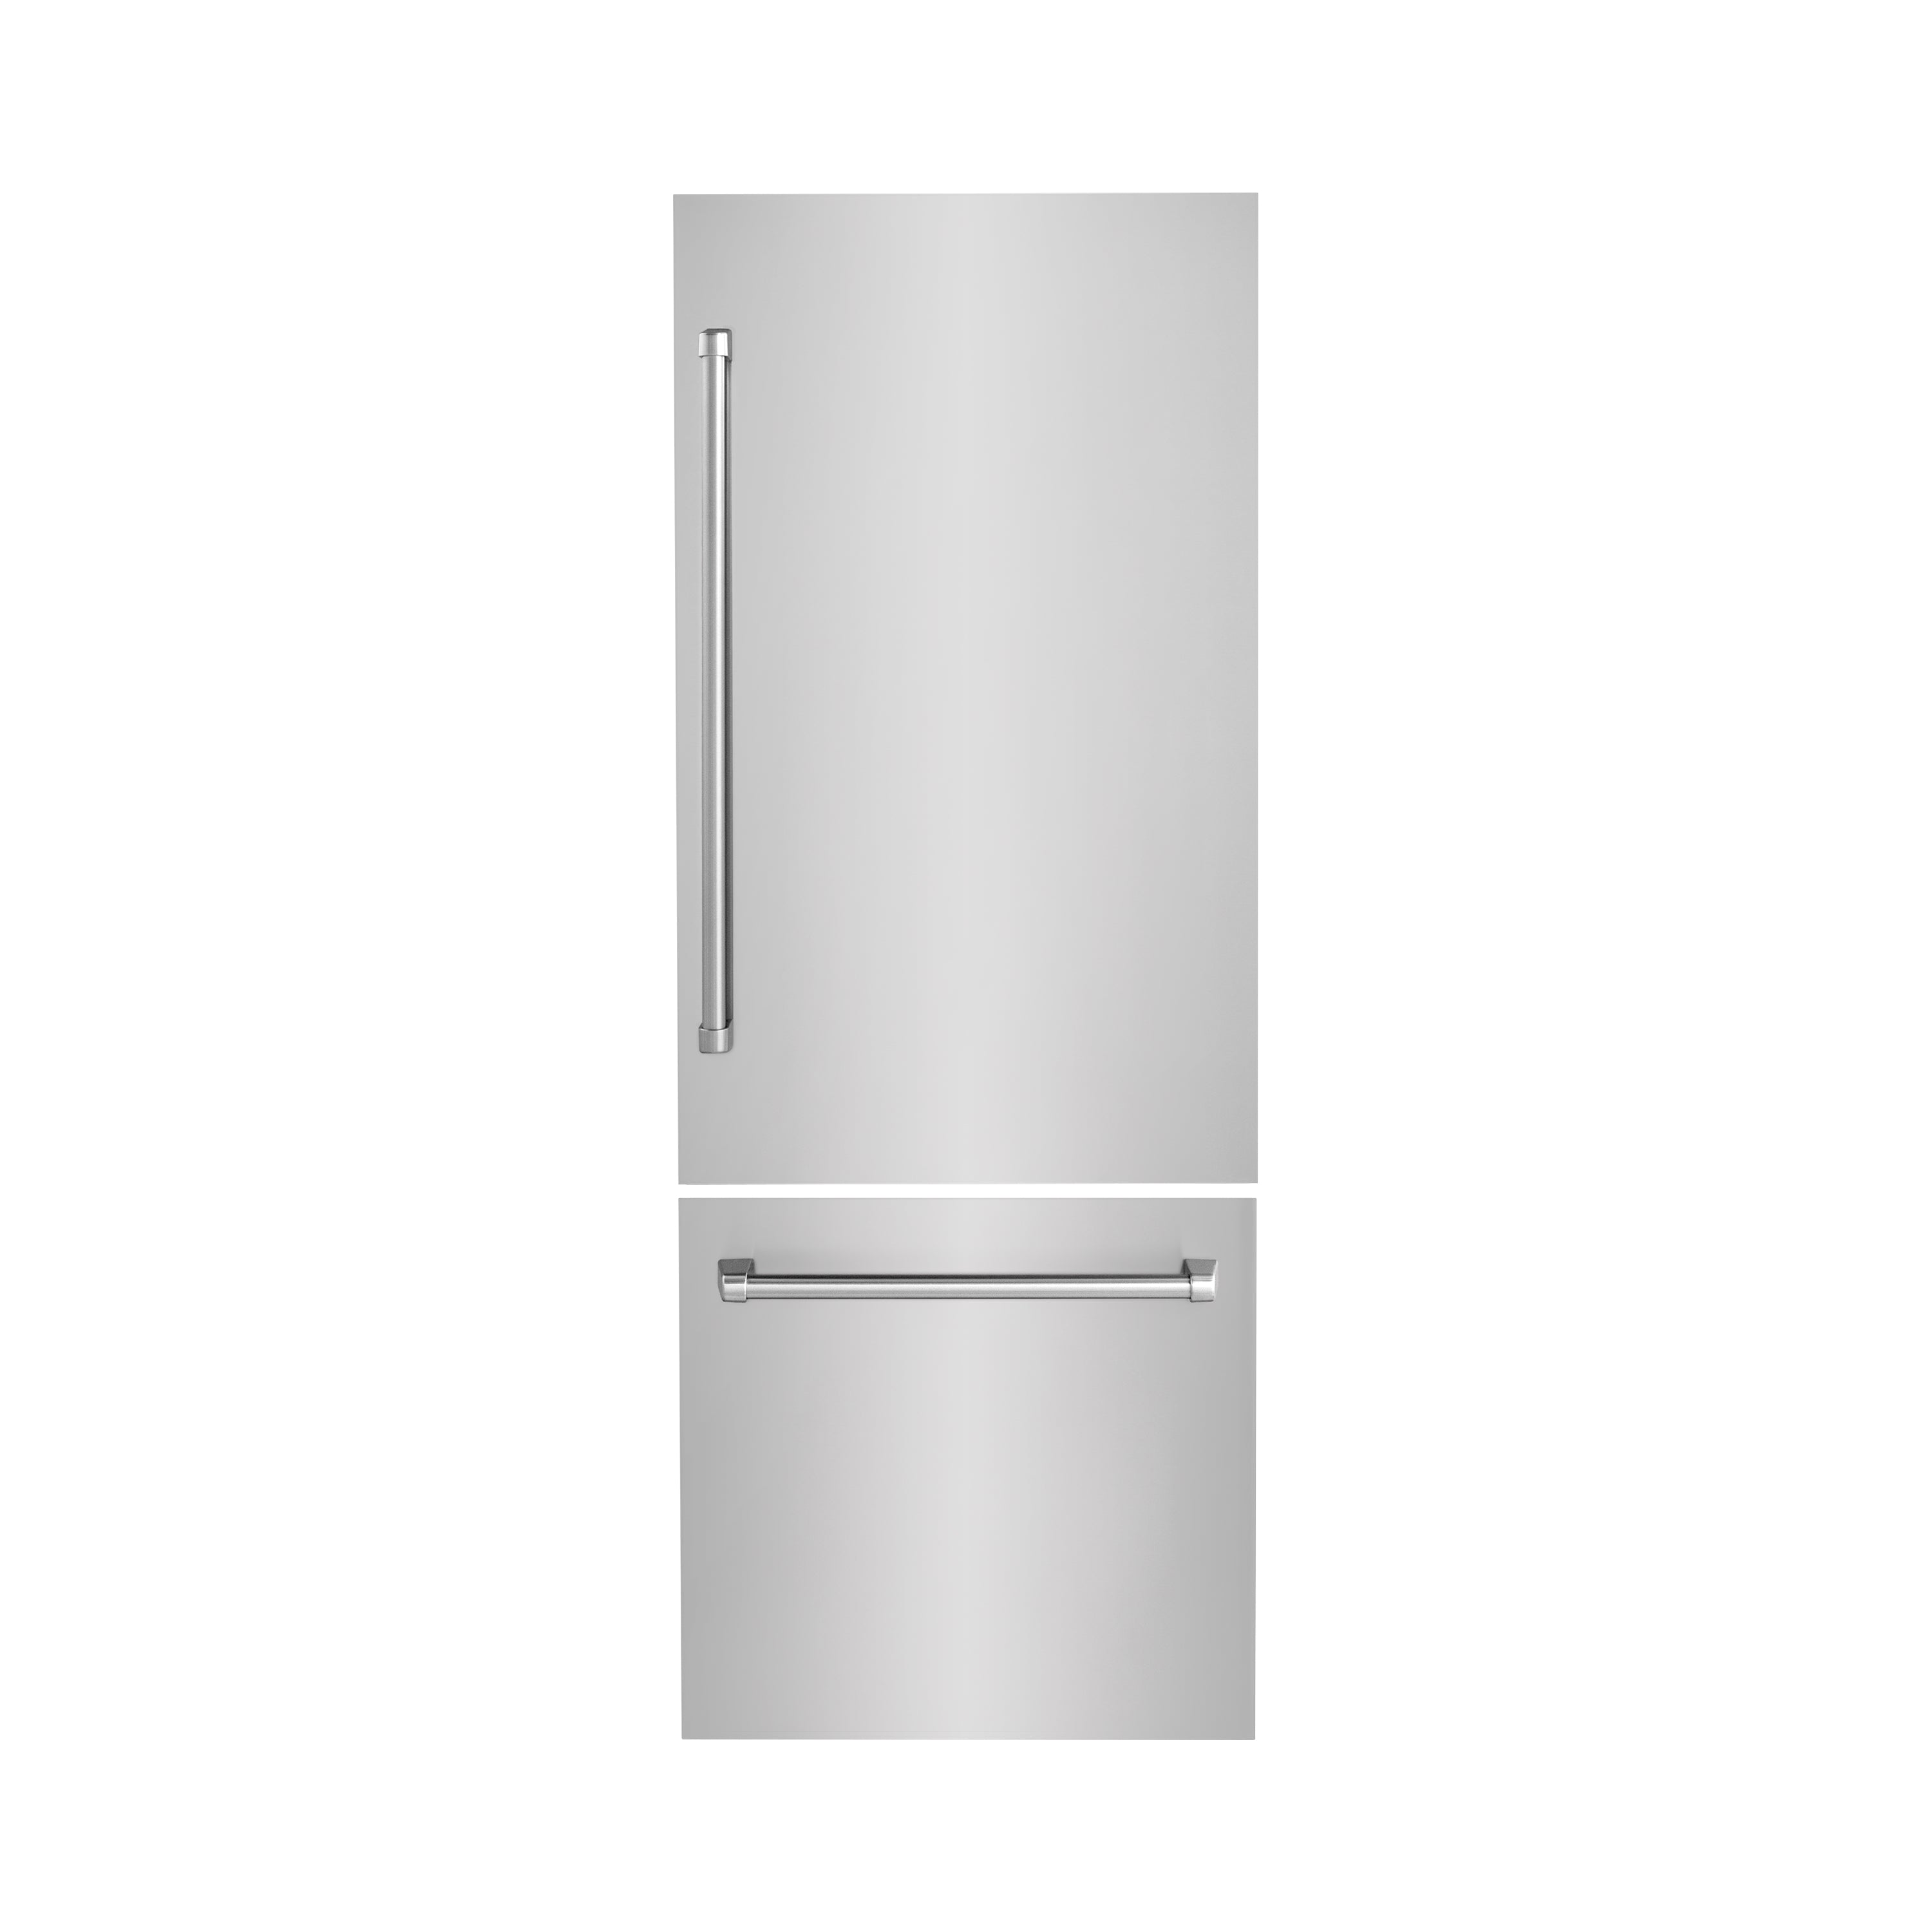 Panels & Handles Only- ZLINE 30 in. Refrigerator Panels in Stainless Steel for a 30 in. Built-in Refrigerator (RPBIV-304-30)